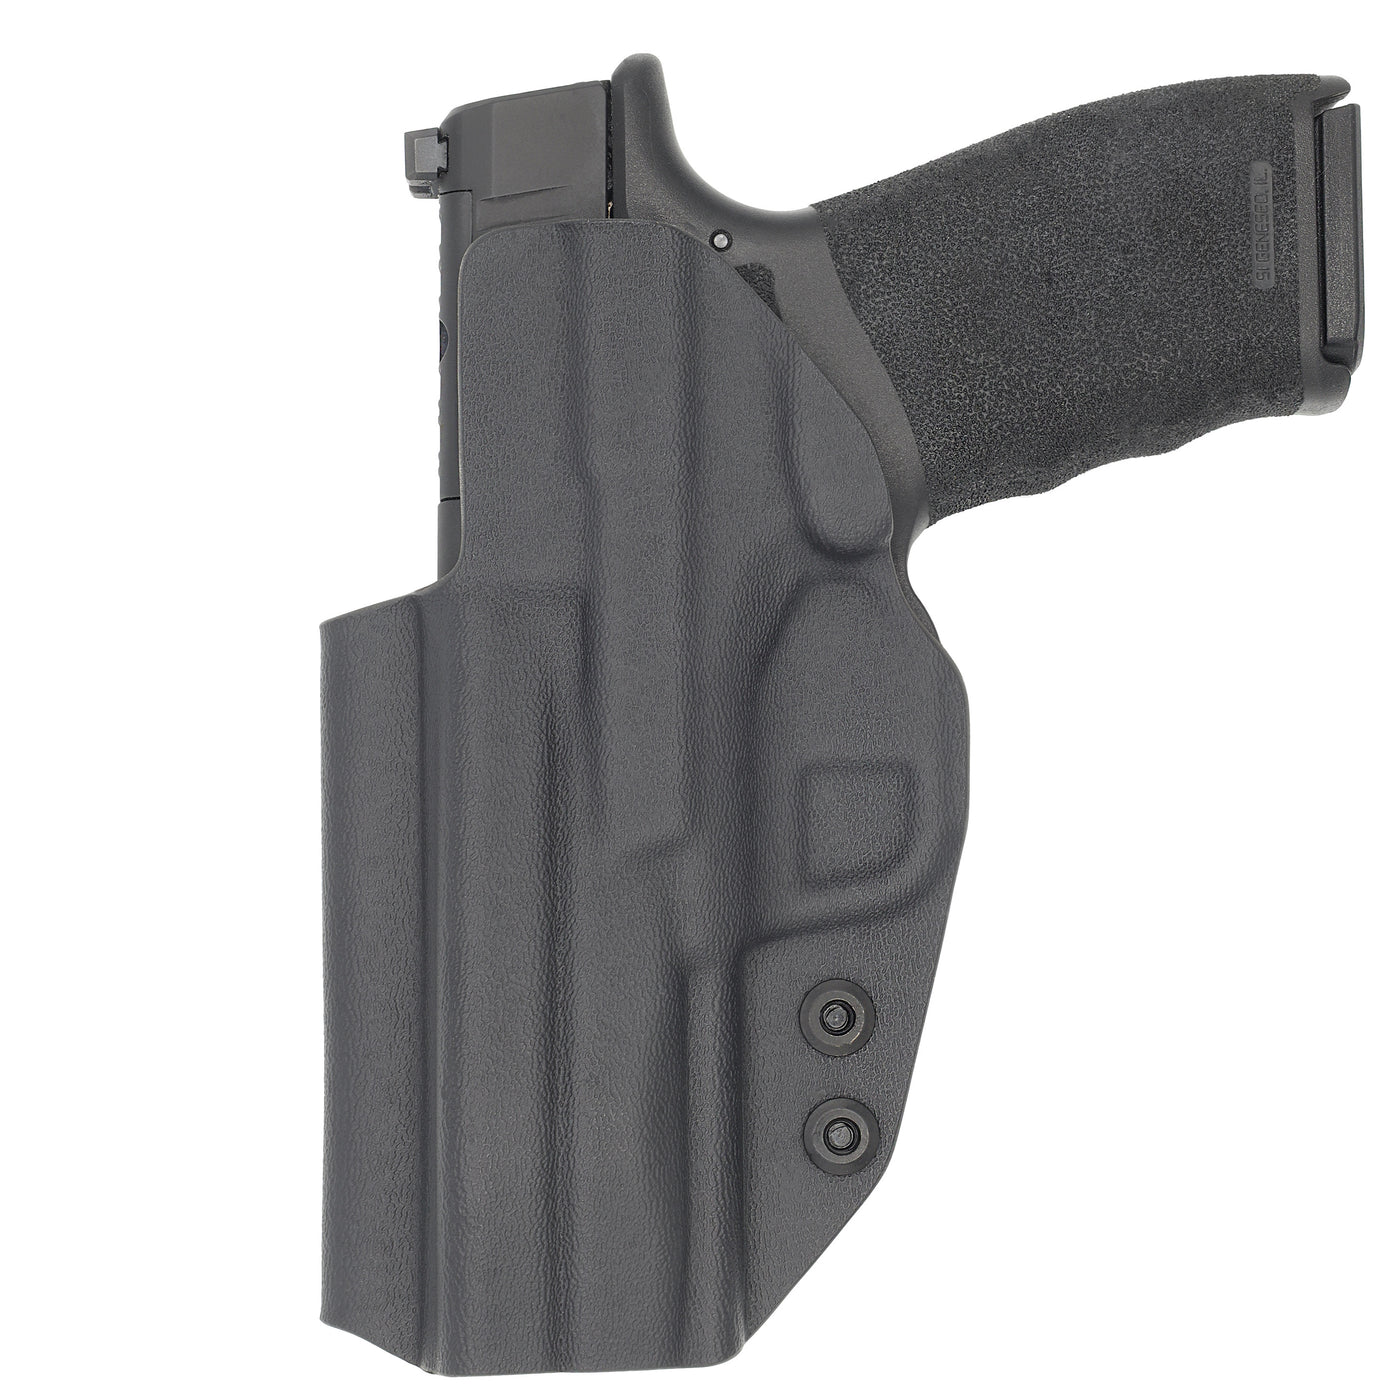 C&G Holsters quickship IWB Covert Springfield Hellcat PRO in holstered position back view